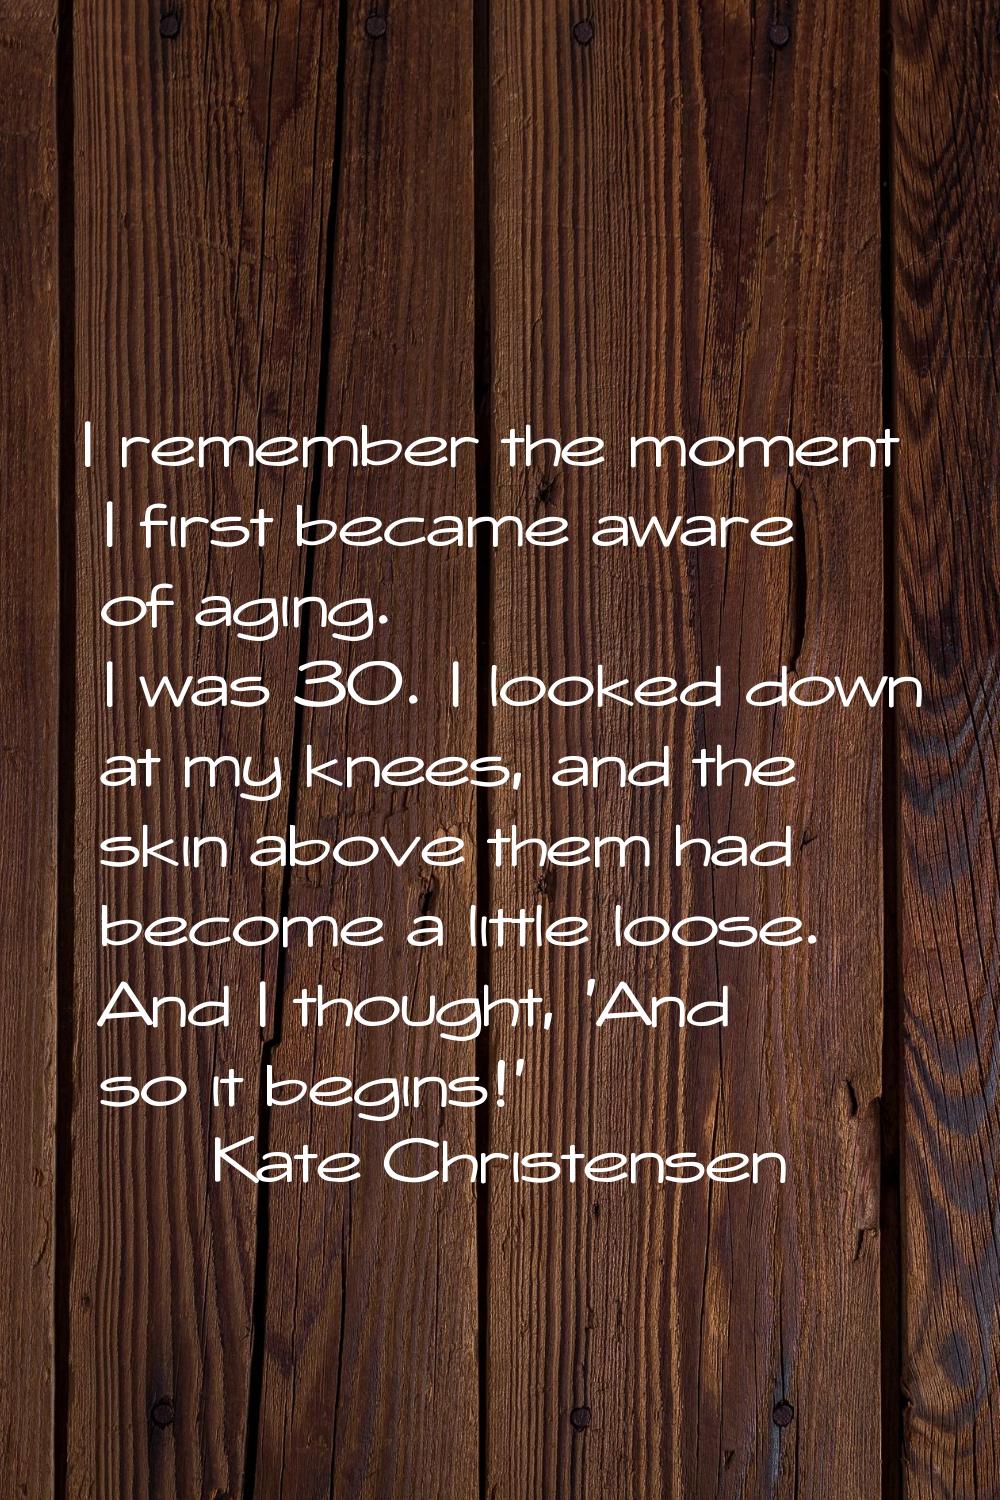 I remember the moment I first became aware of aging. I was 30. I looked down at my knees, and the s